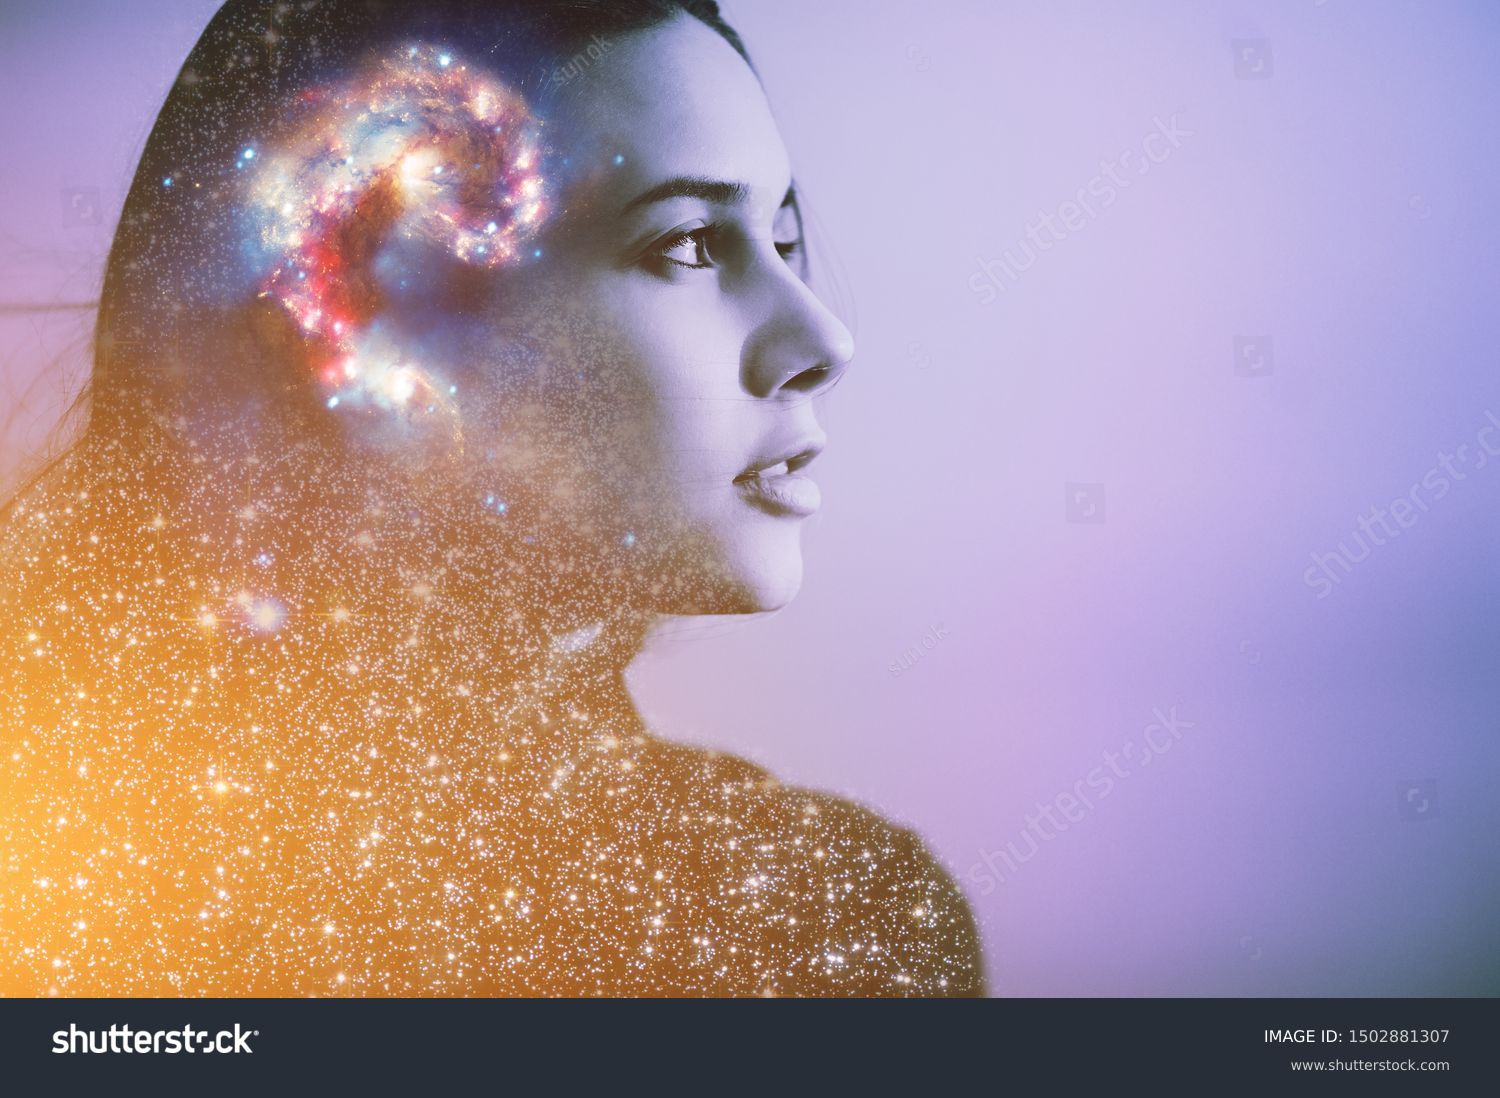 Double multiply exposure abstract portrait of a dreamer cute young woman face with galaxy universe space inside head. Spirit cosmos astronomy life zen concept Elements of this image furnished by NASA #1502881307